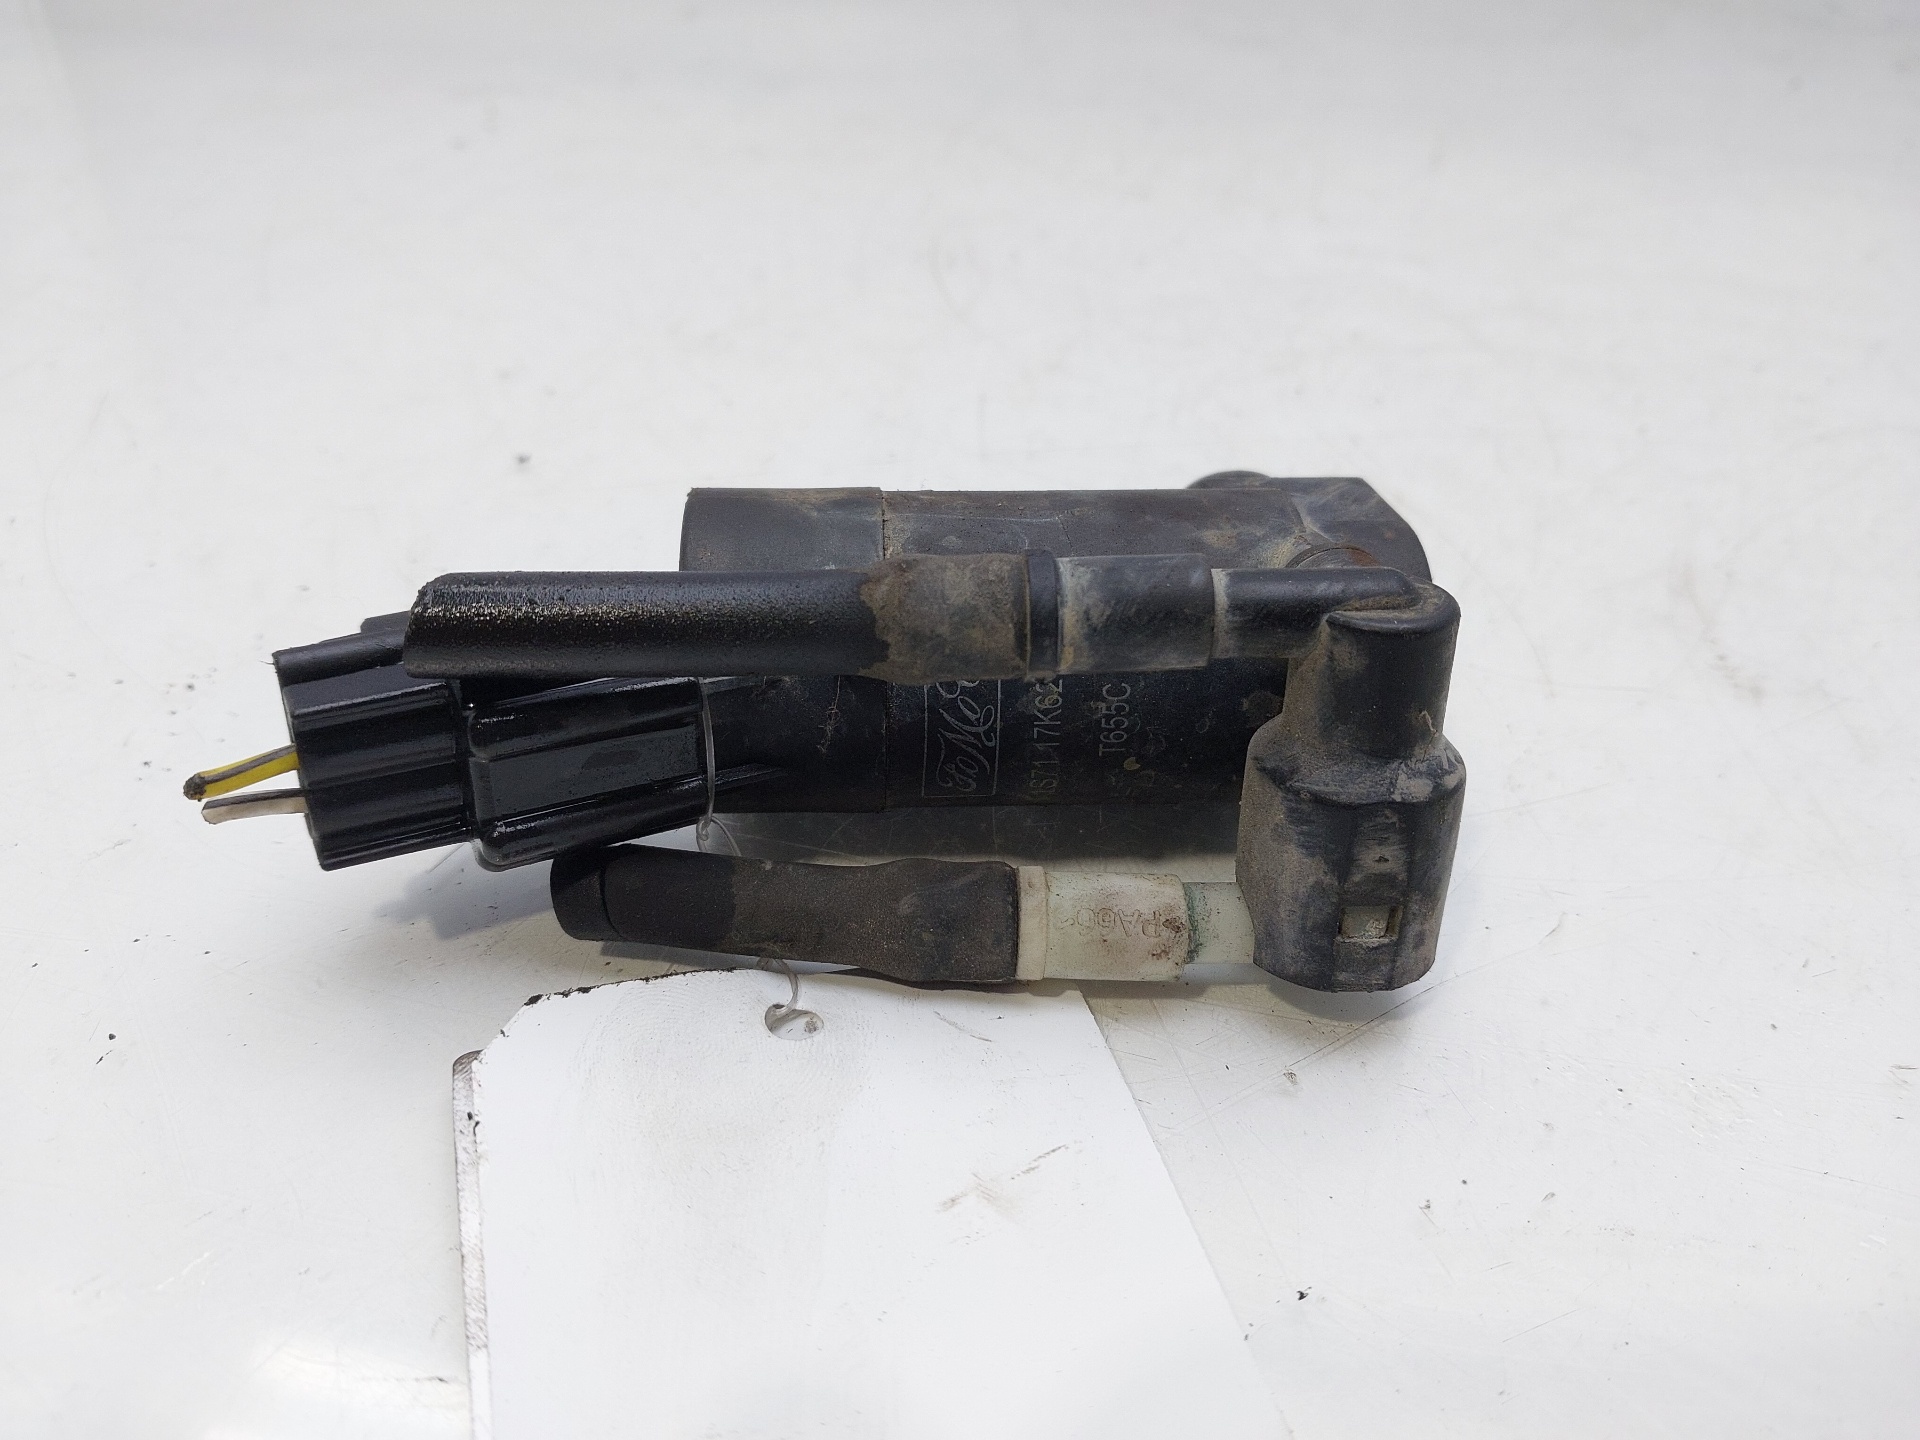 FORD Mondeo 3 generation (2000-2007) Washer Tank Motor 1S7117K624FD 22473338